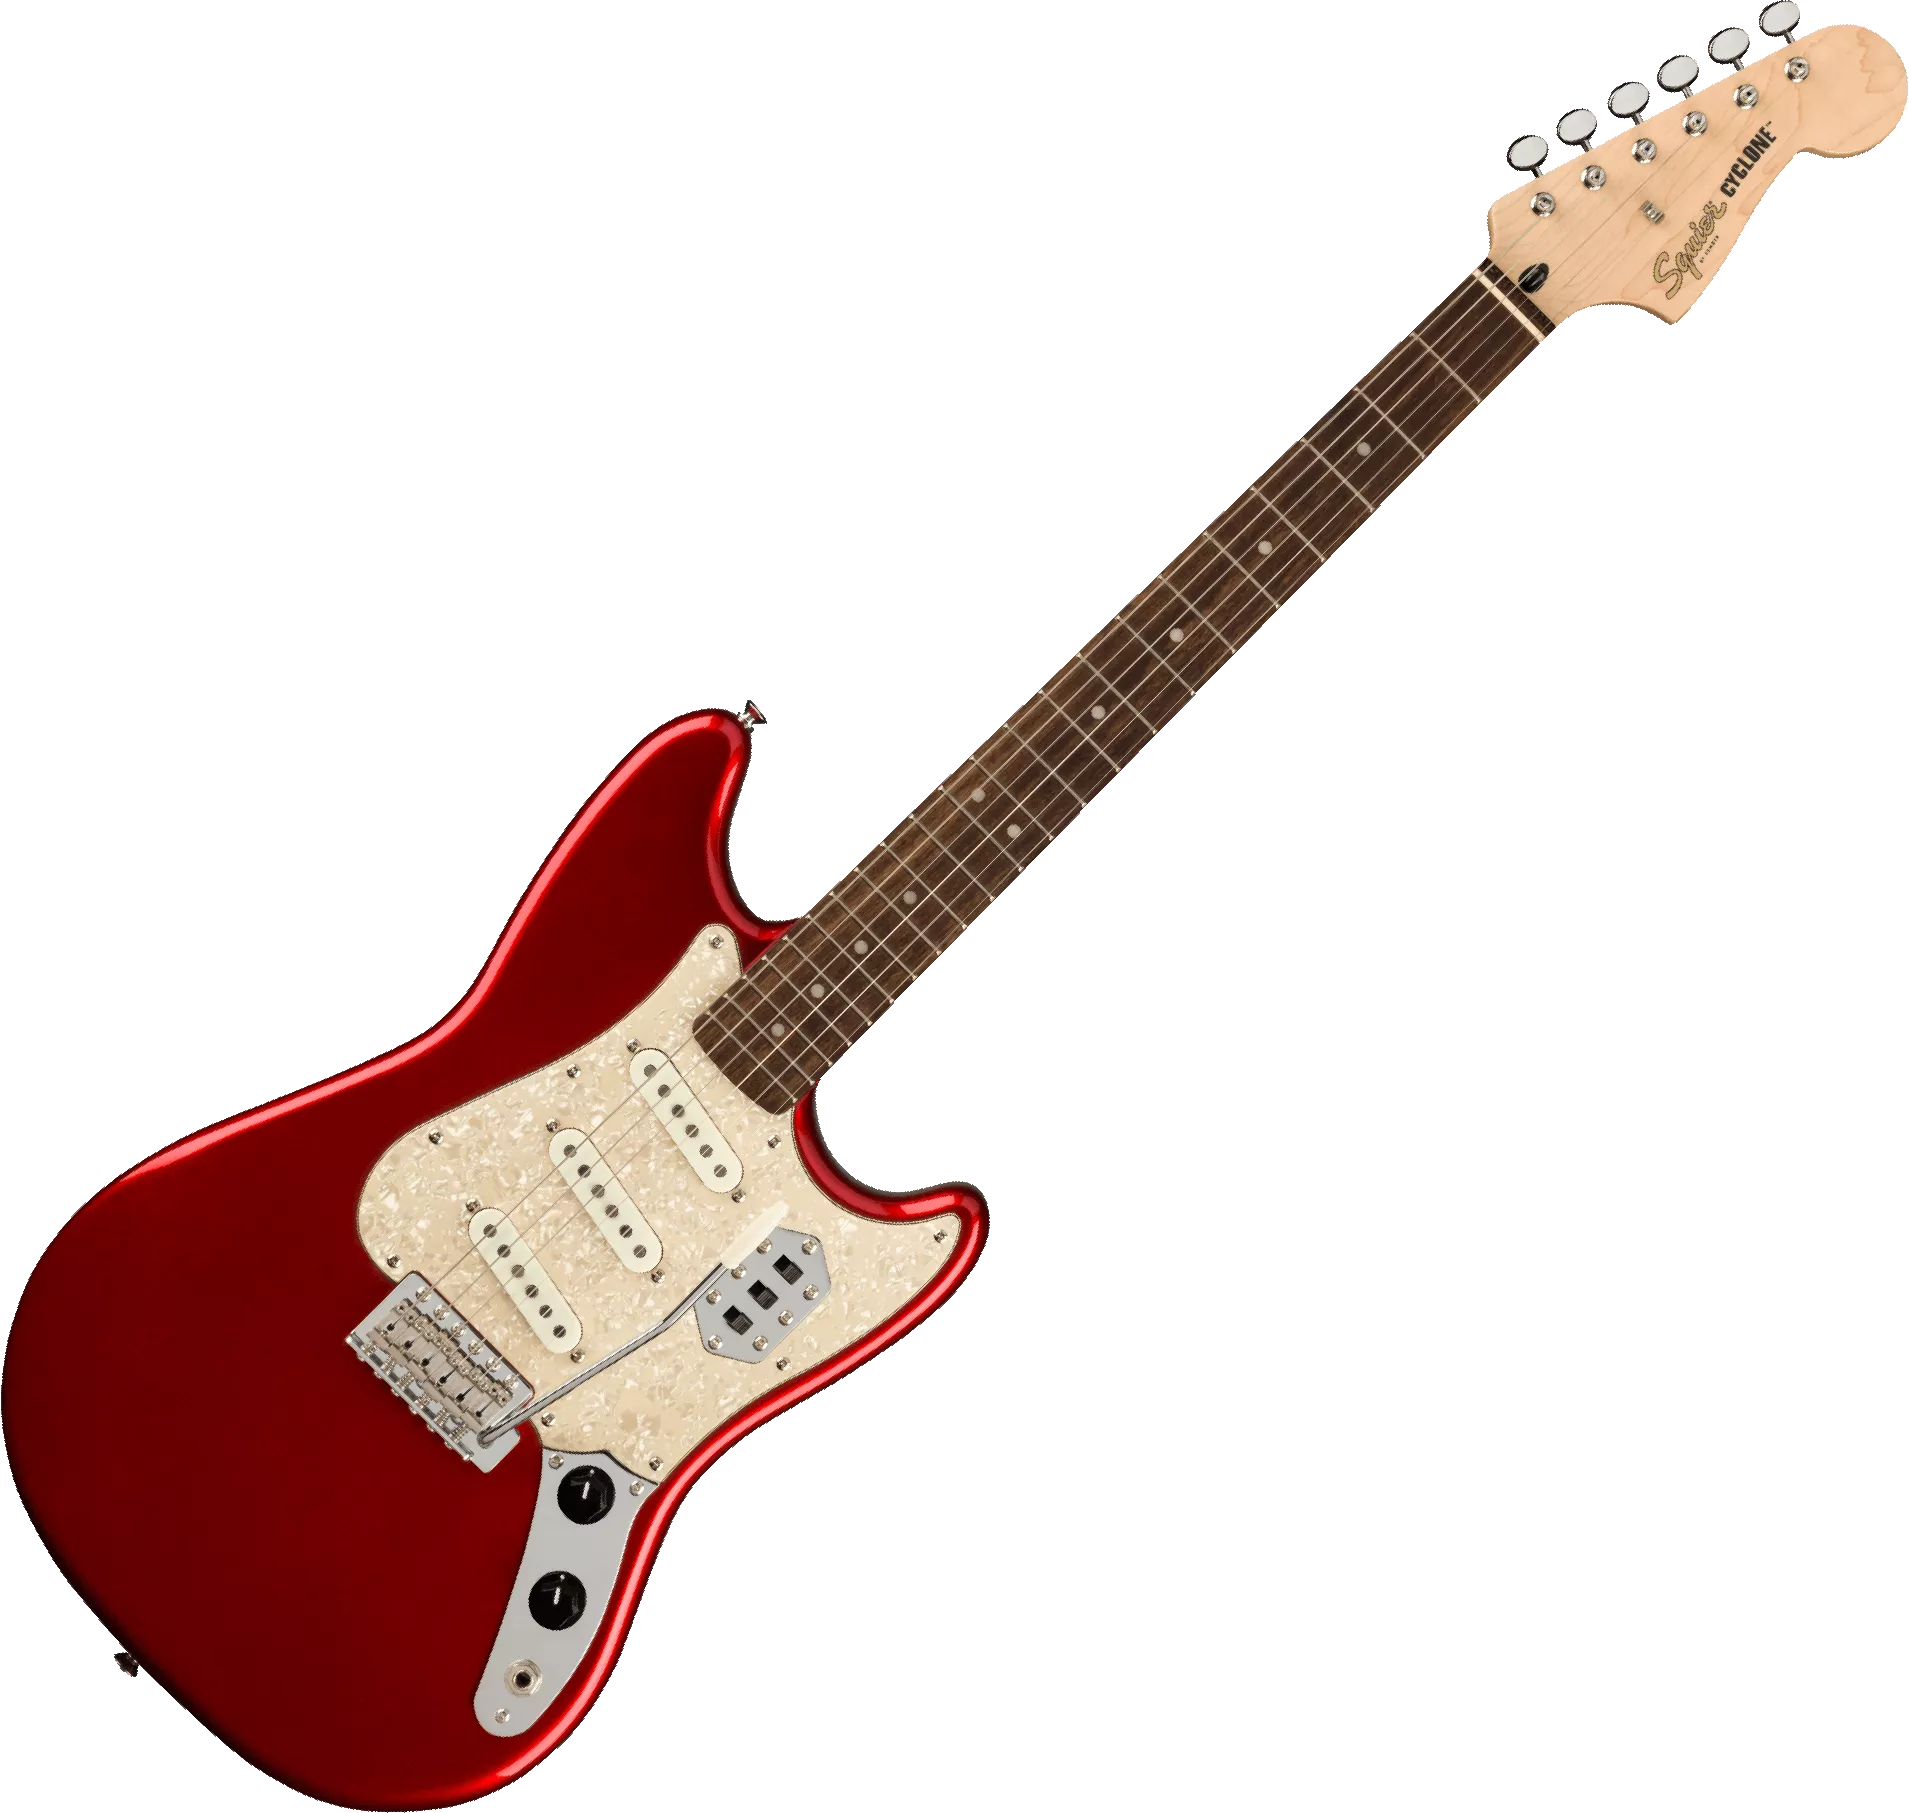 rizgt楽器【6905】 Squier Paranomal cyclone 赤 3S - ギター